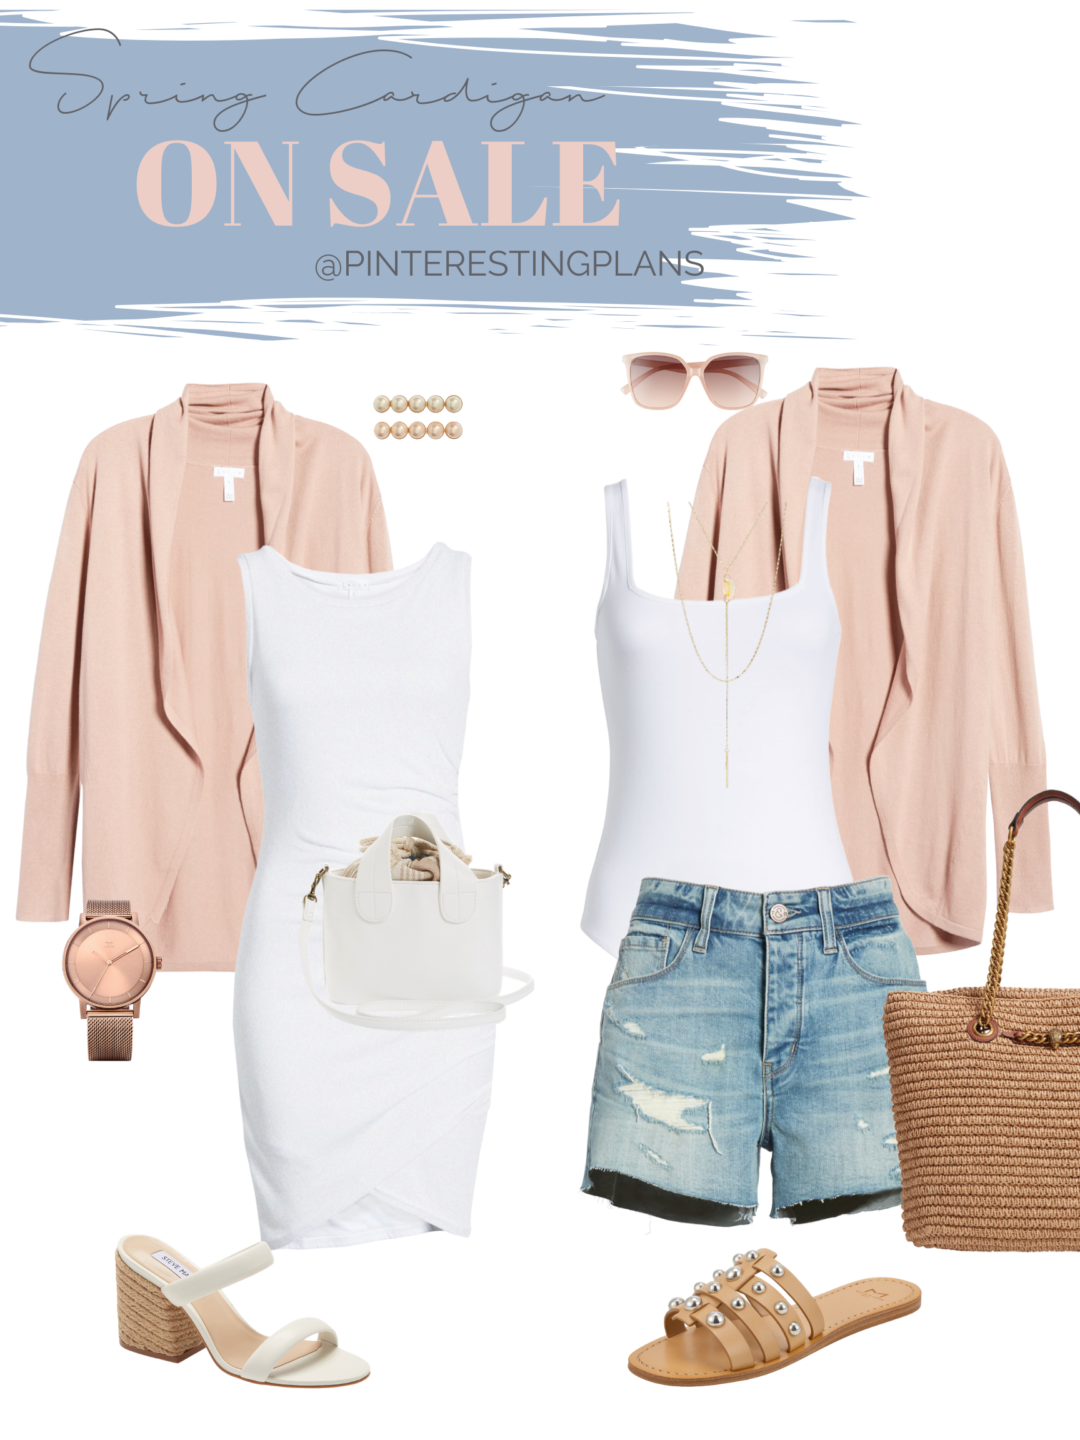 mother's day outfit ideas from the nordstrom spring sale - pinteresting plans blog